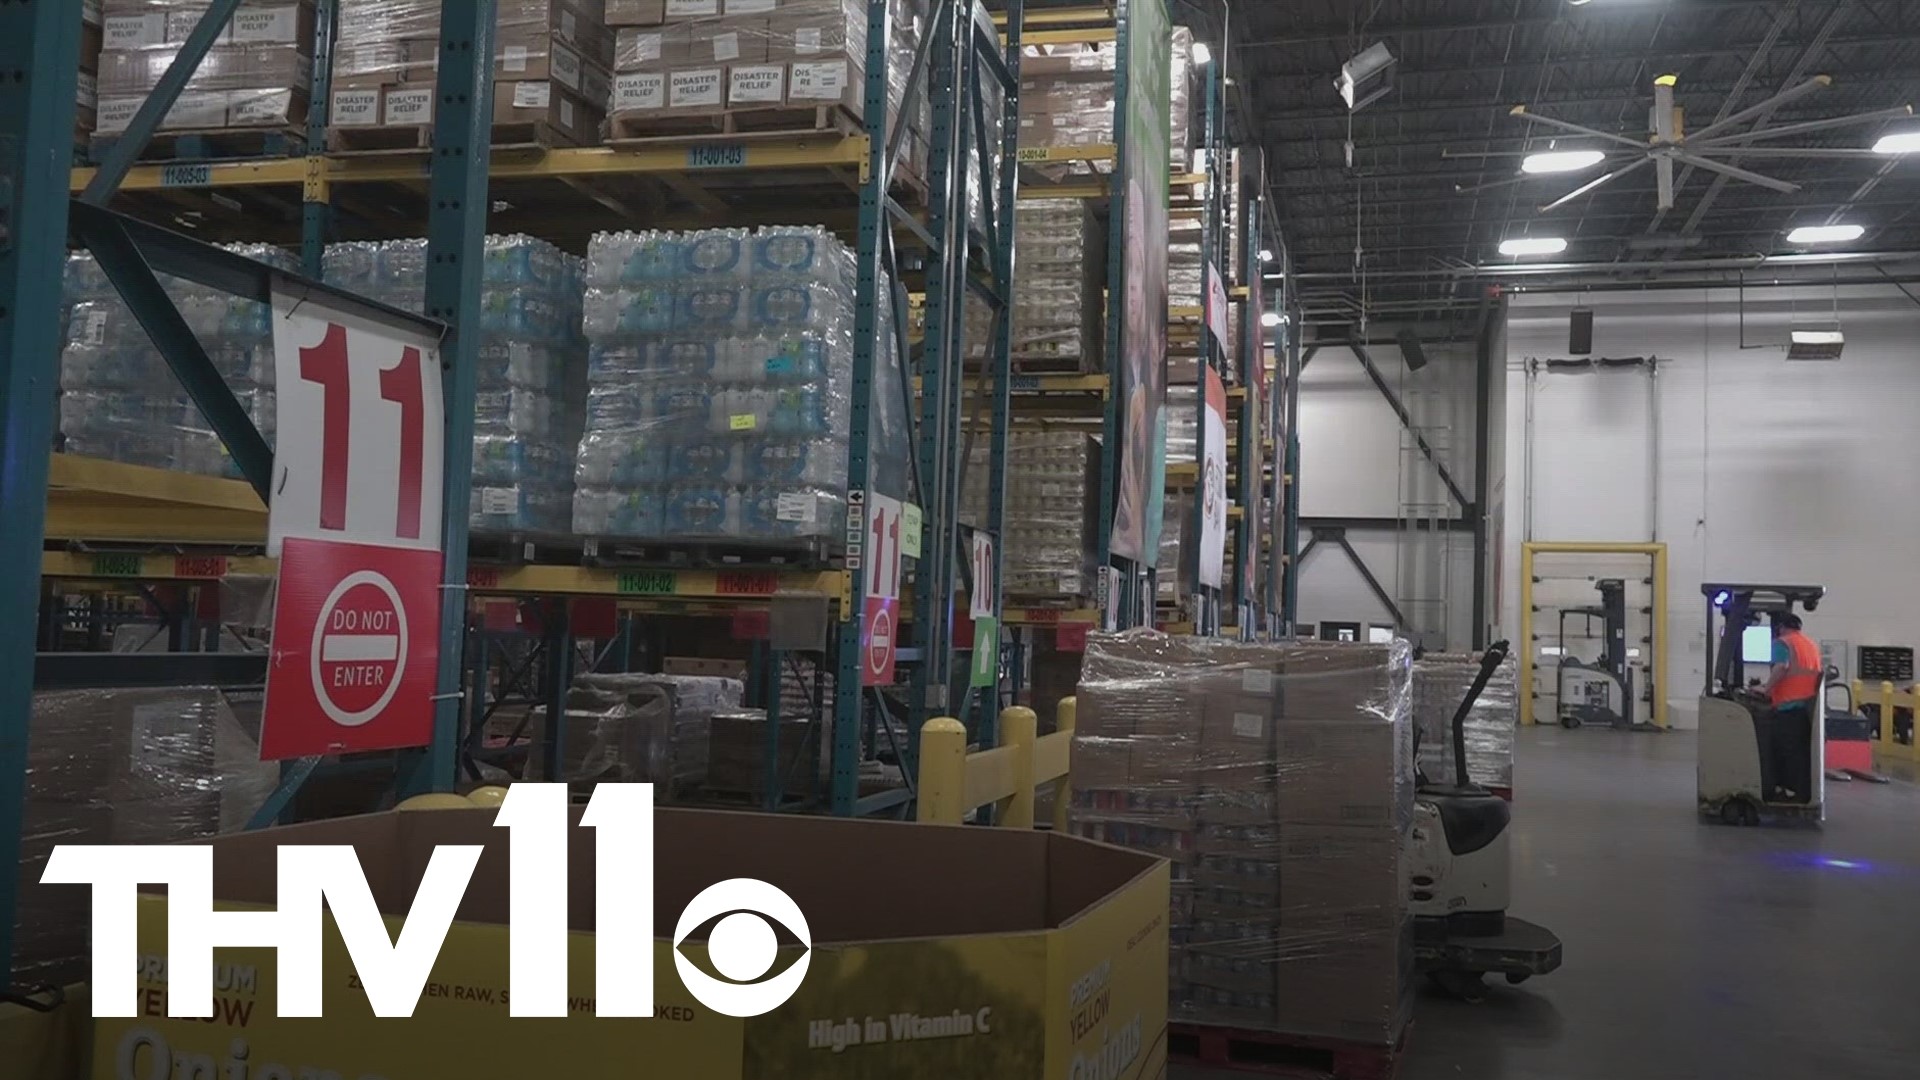 The Arkansas Foodbank refers to itself as a disaster relief organization, and keeping people fed has become an even bigger priority with the winter weather.